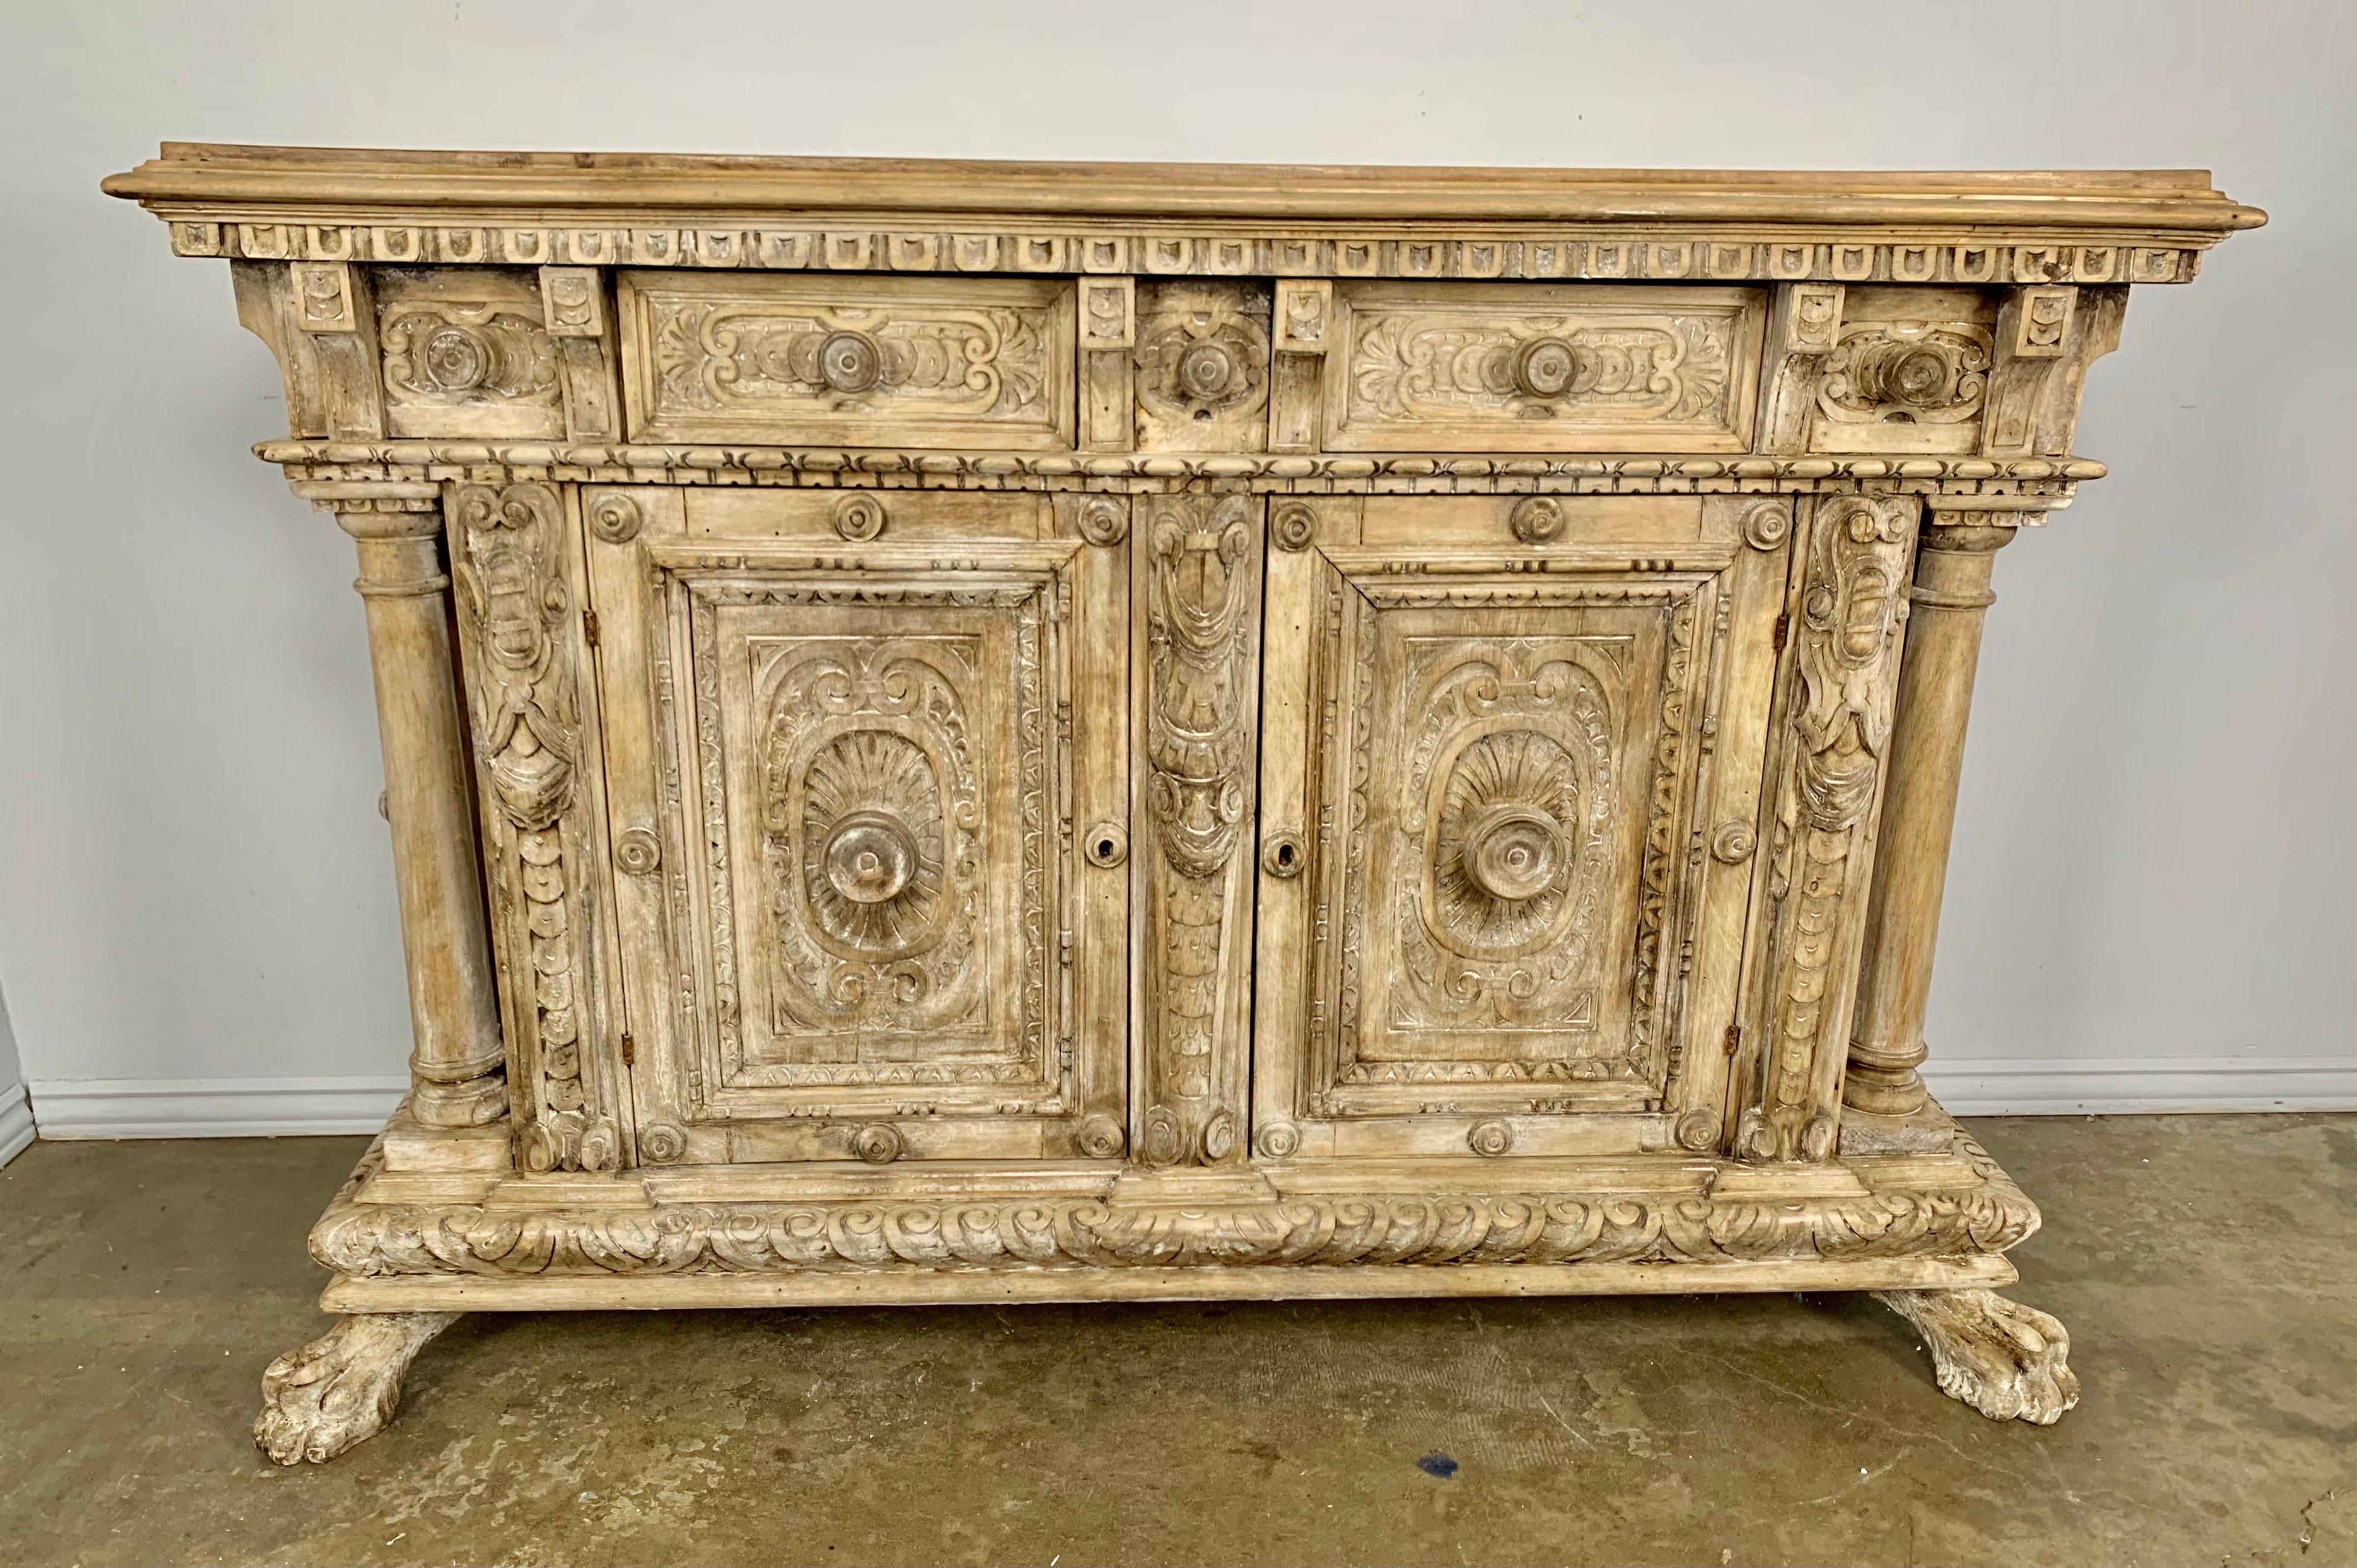 18th Century French bleached wood walnut buffet with two drawers. There are also two doors that conceal plenty of storage space. The buffet stands on four lion paw feet and is intricately carved throughout with many beautiful details.